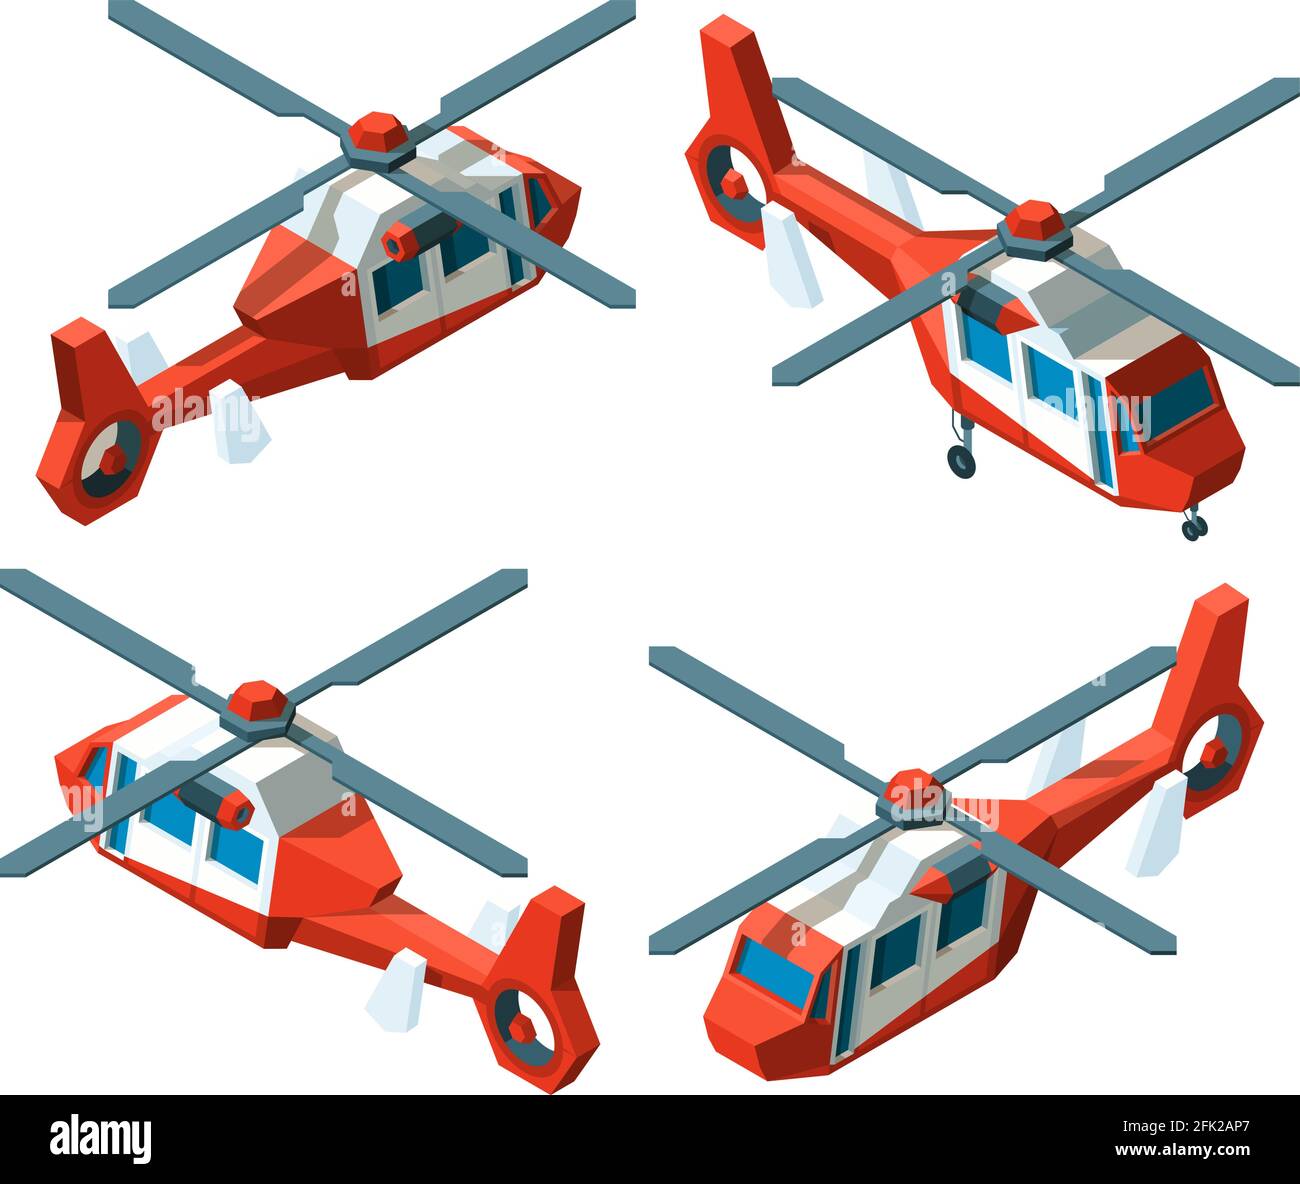 Helicopter isometric. Low poly avia transport different point views vector collection Stock Vector